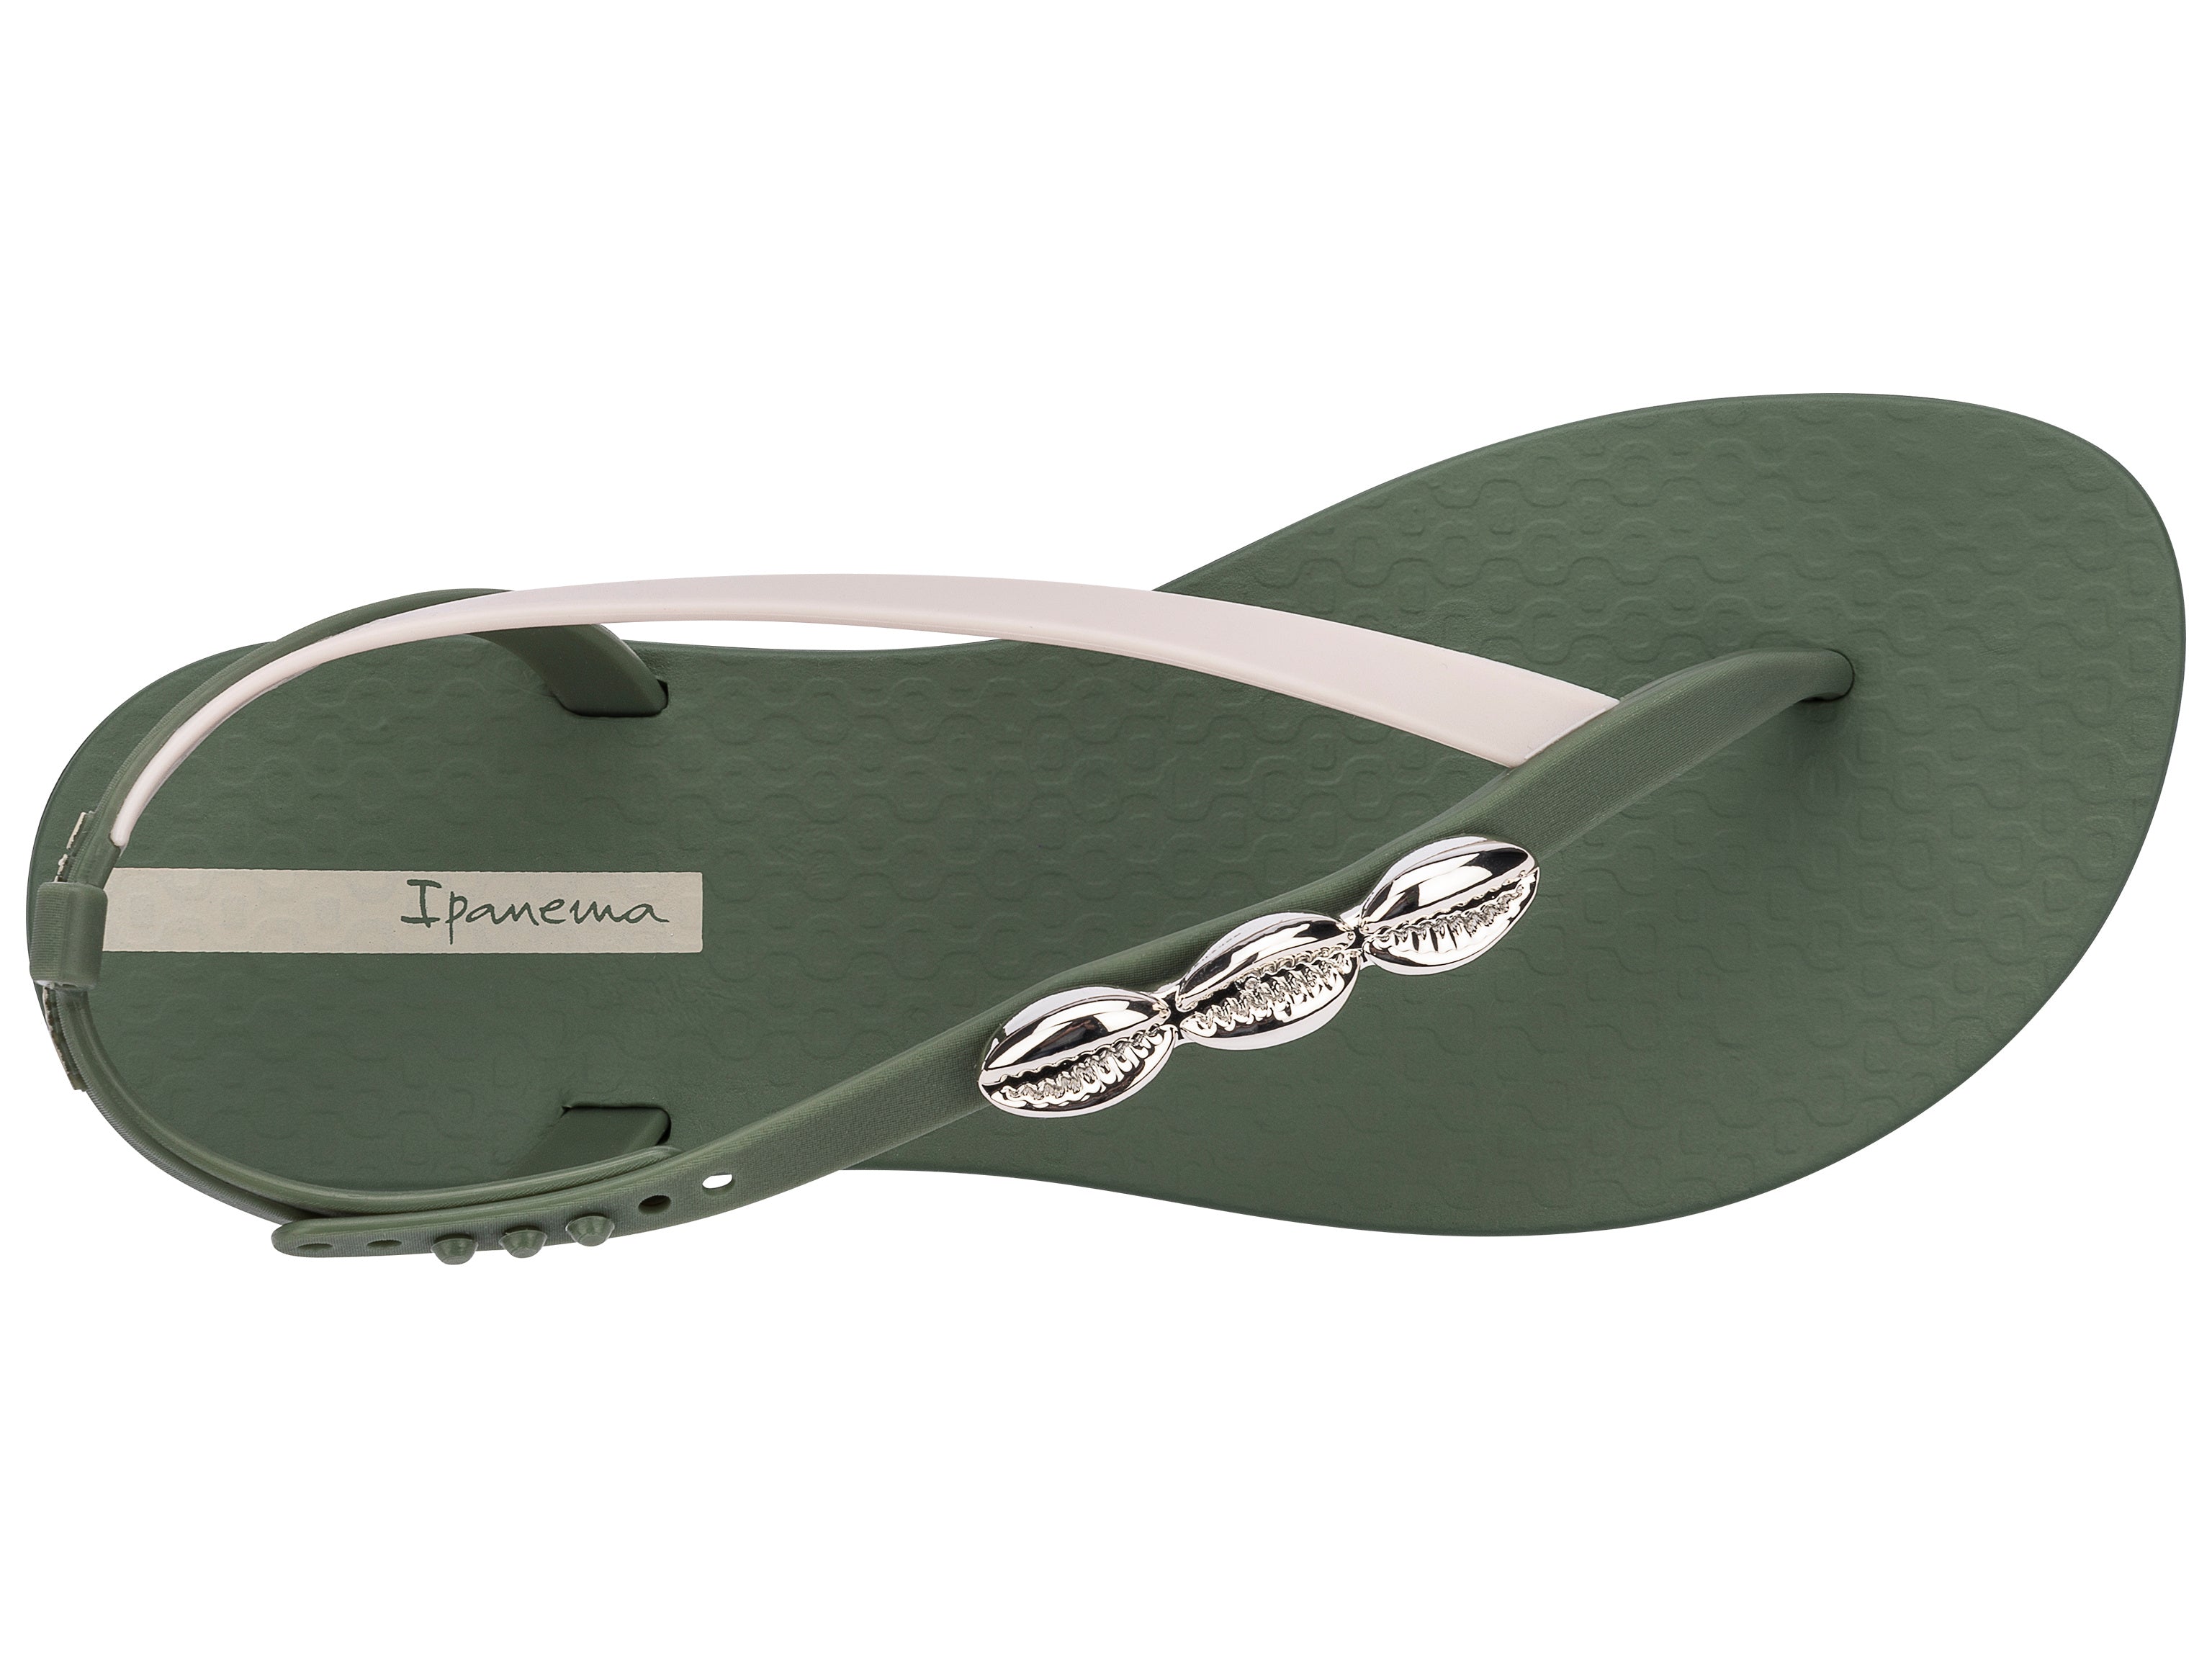 Top view of a green Ipanema Salty women's sandal with 3 silver shells on the strap.